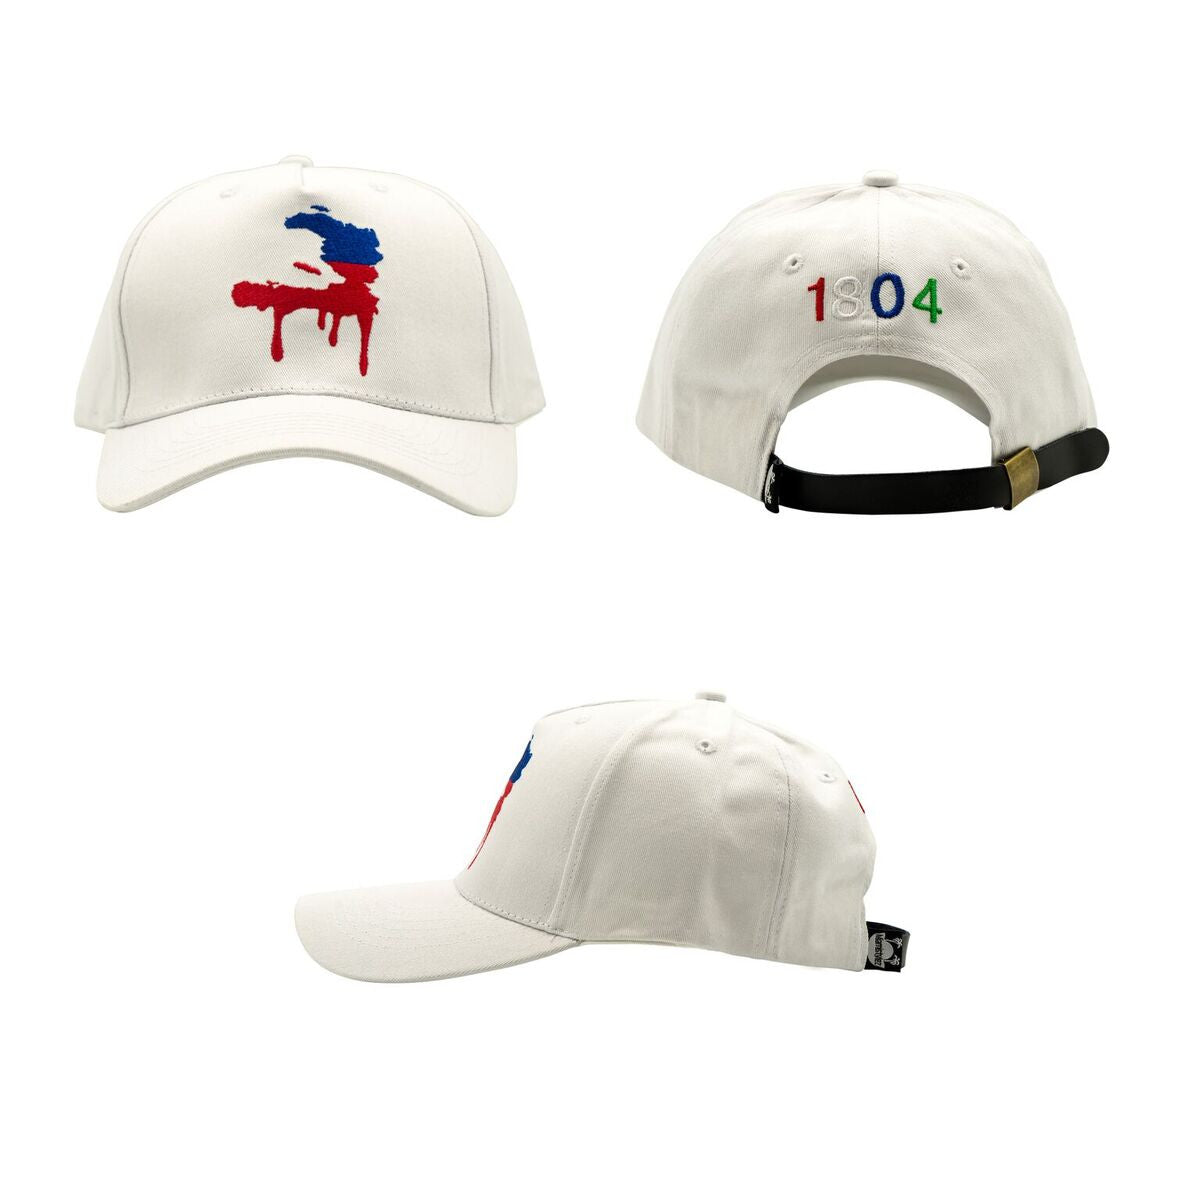 White Miamistylez 1804 3D Number Embroidered Dad Hat